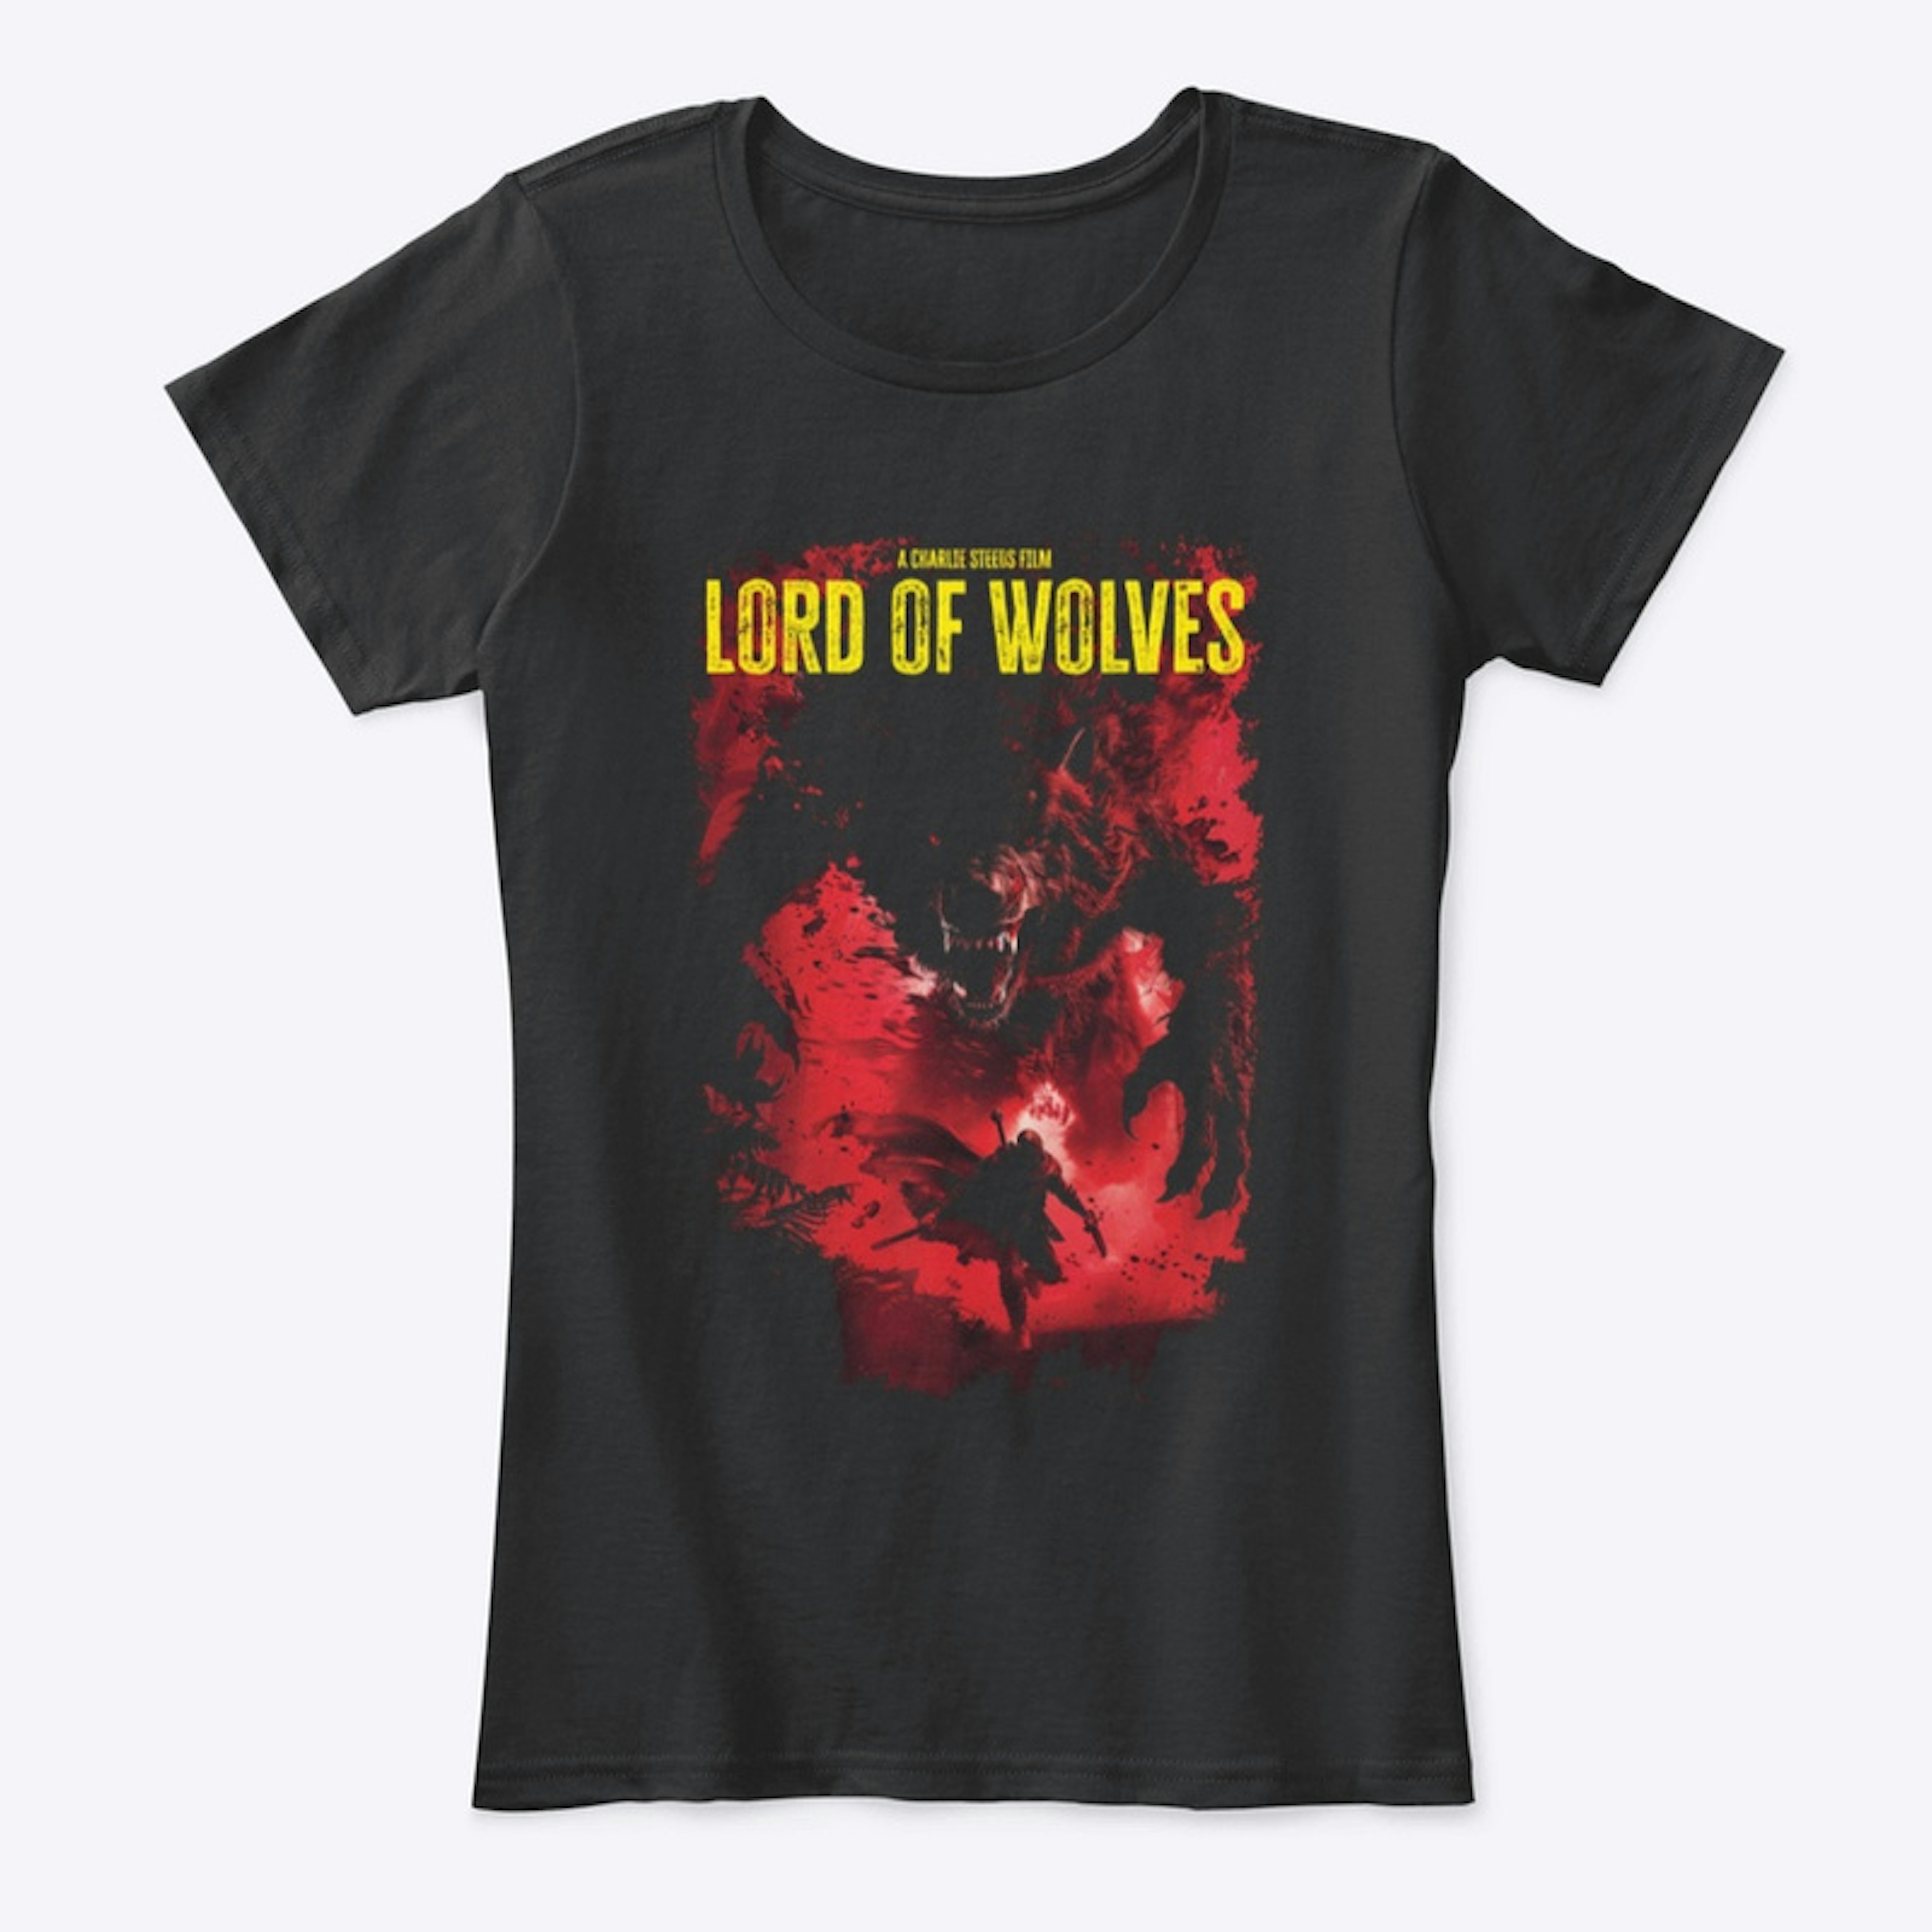 LORD OF WOLVES - A CHARLIE STEEDS FILM